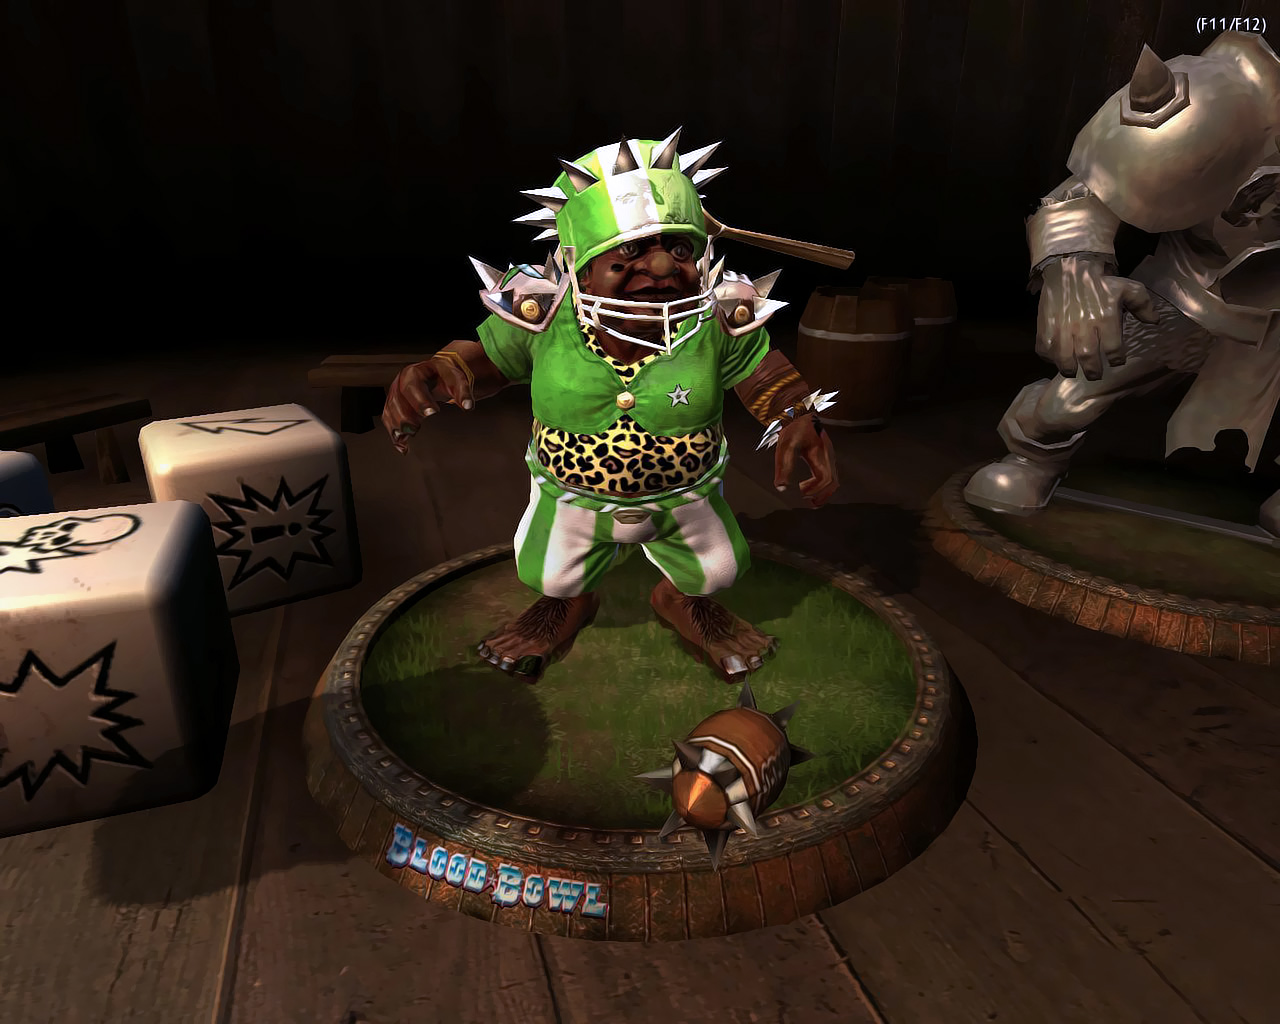 when does blood bowl 3 come out